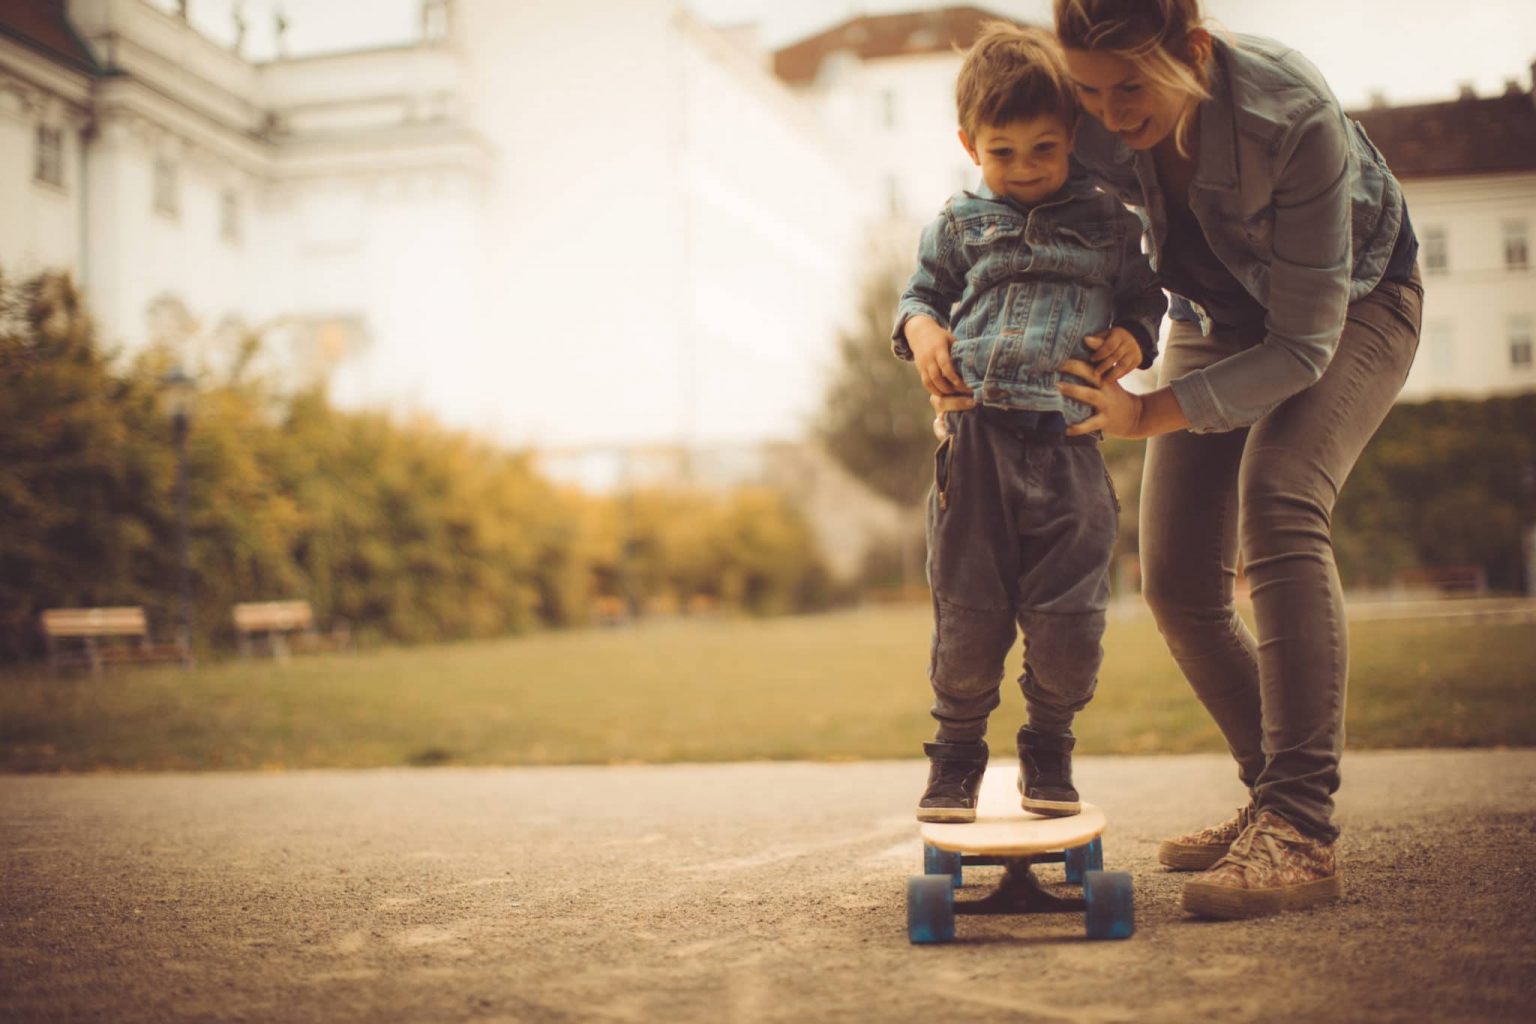 Child on Skateboard Being Held By Mother Due to Recently Diagnosed Balance Disorder